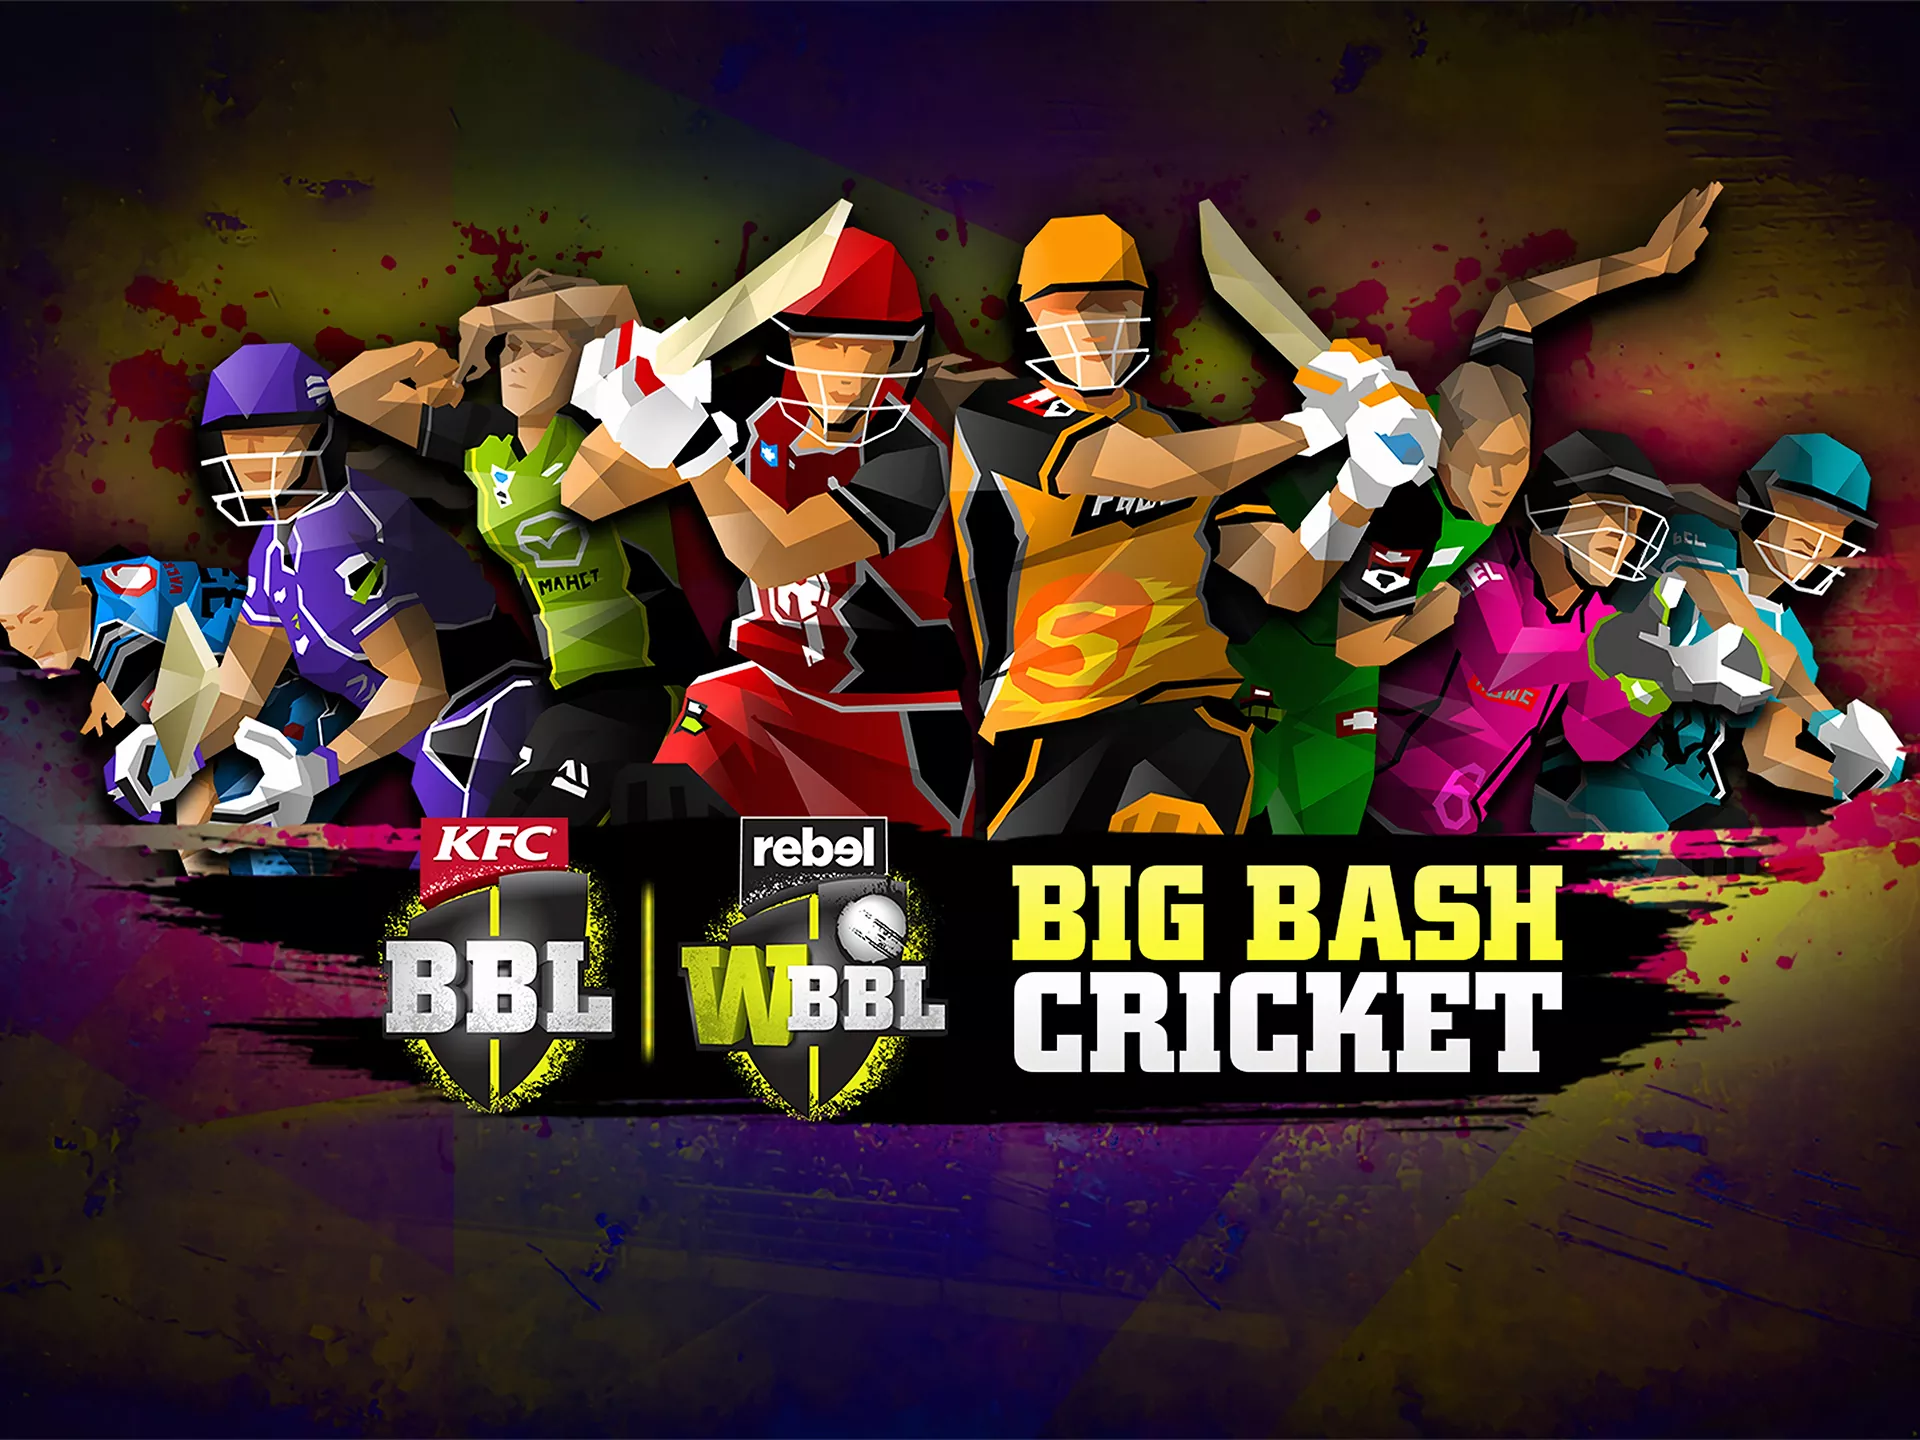 You can place bets on Big Bash League after registering on the site.